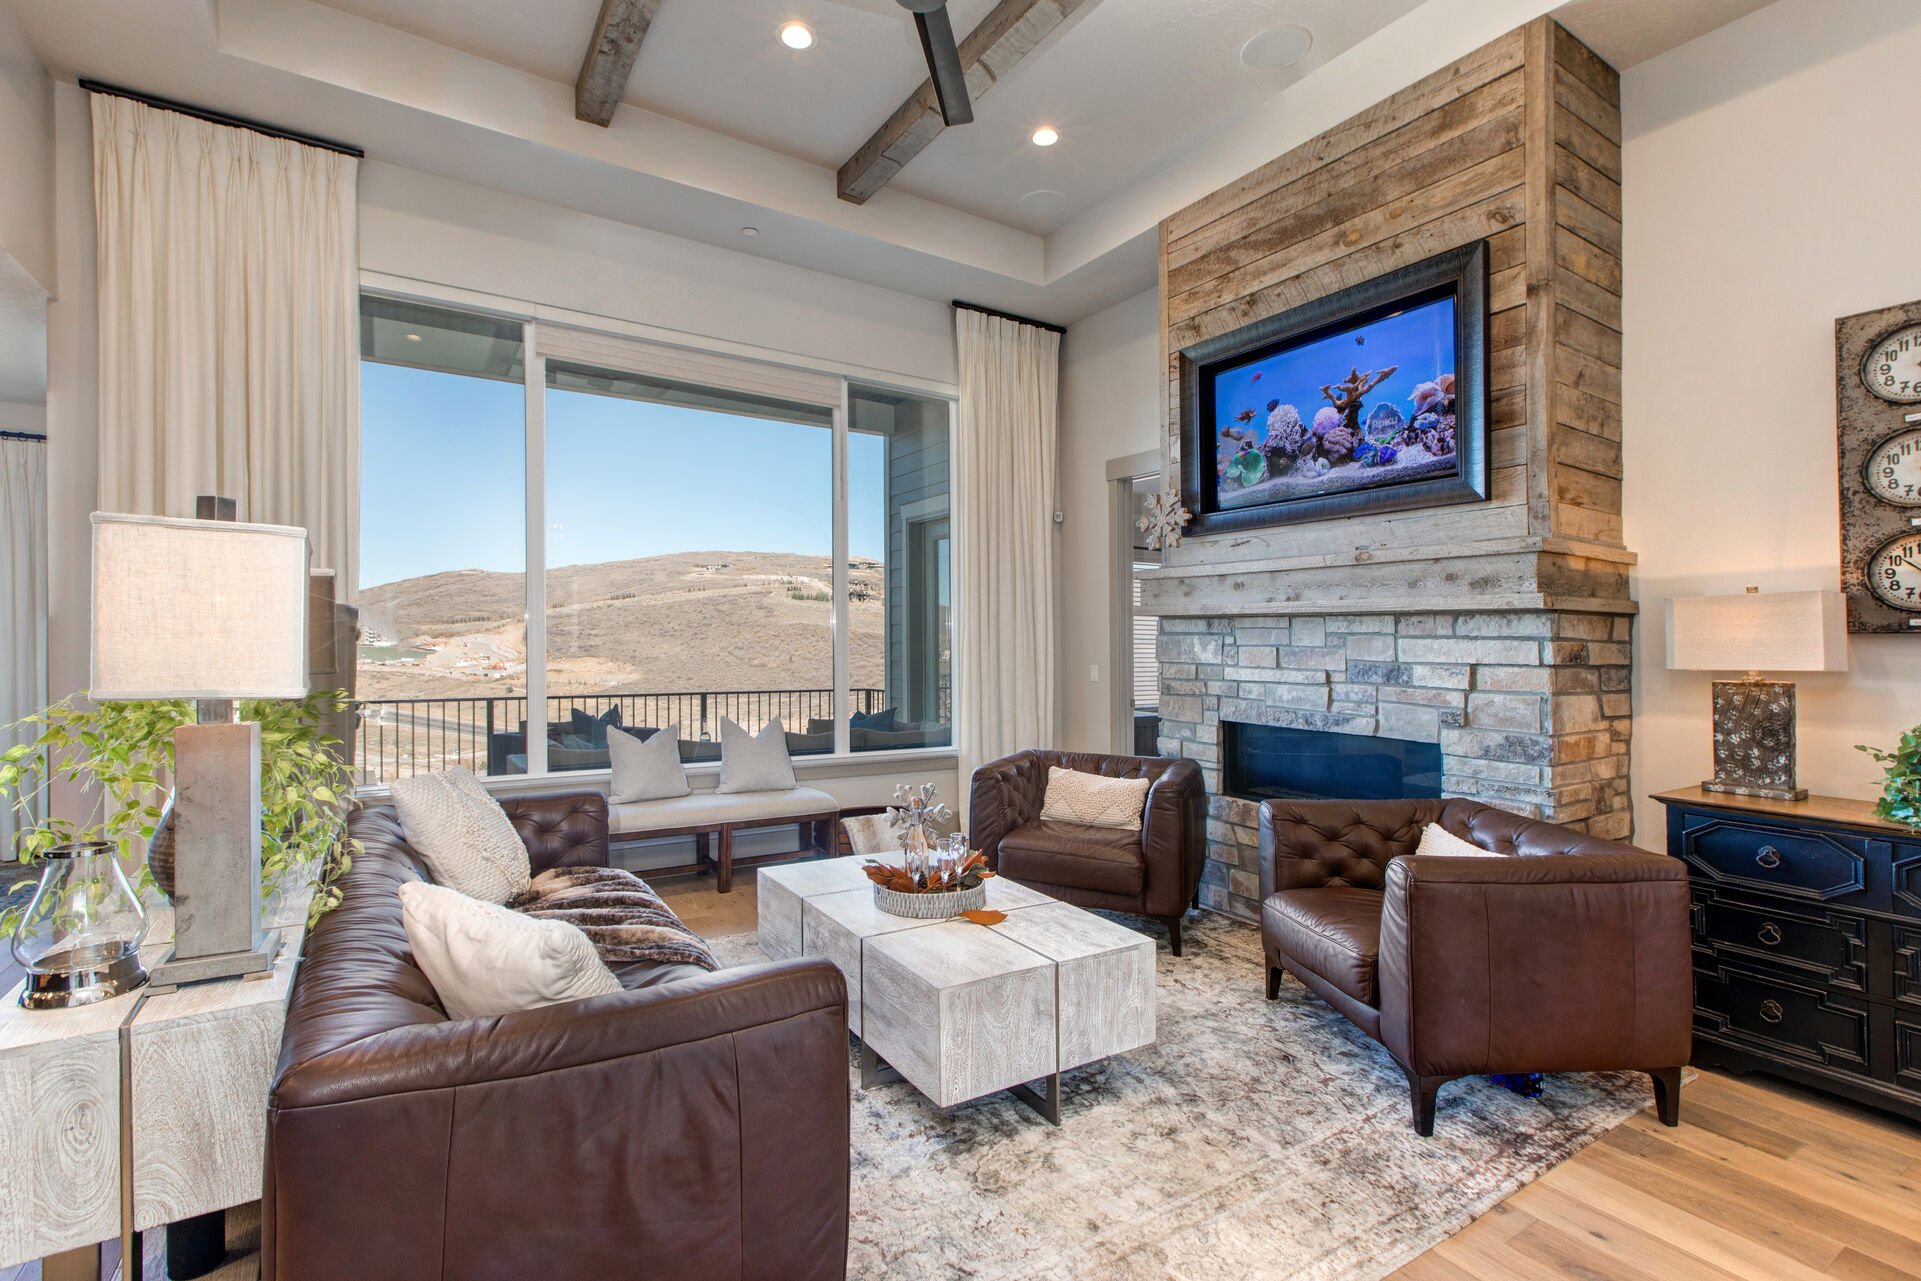 Upper level living room with leather furnishings, smart TV, gas fireplace, reading bench, and views of the surrounding area and mountains